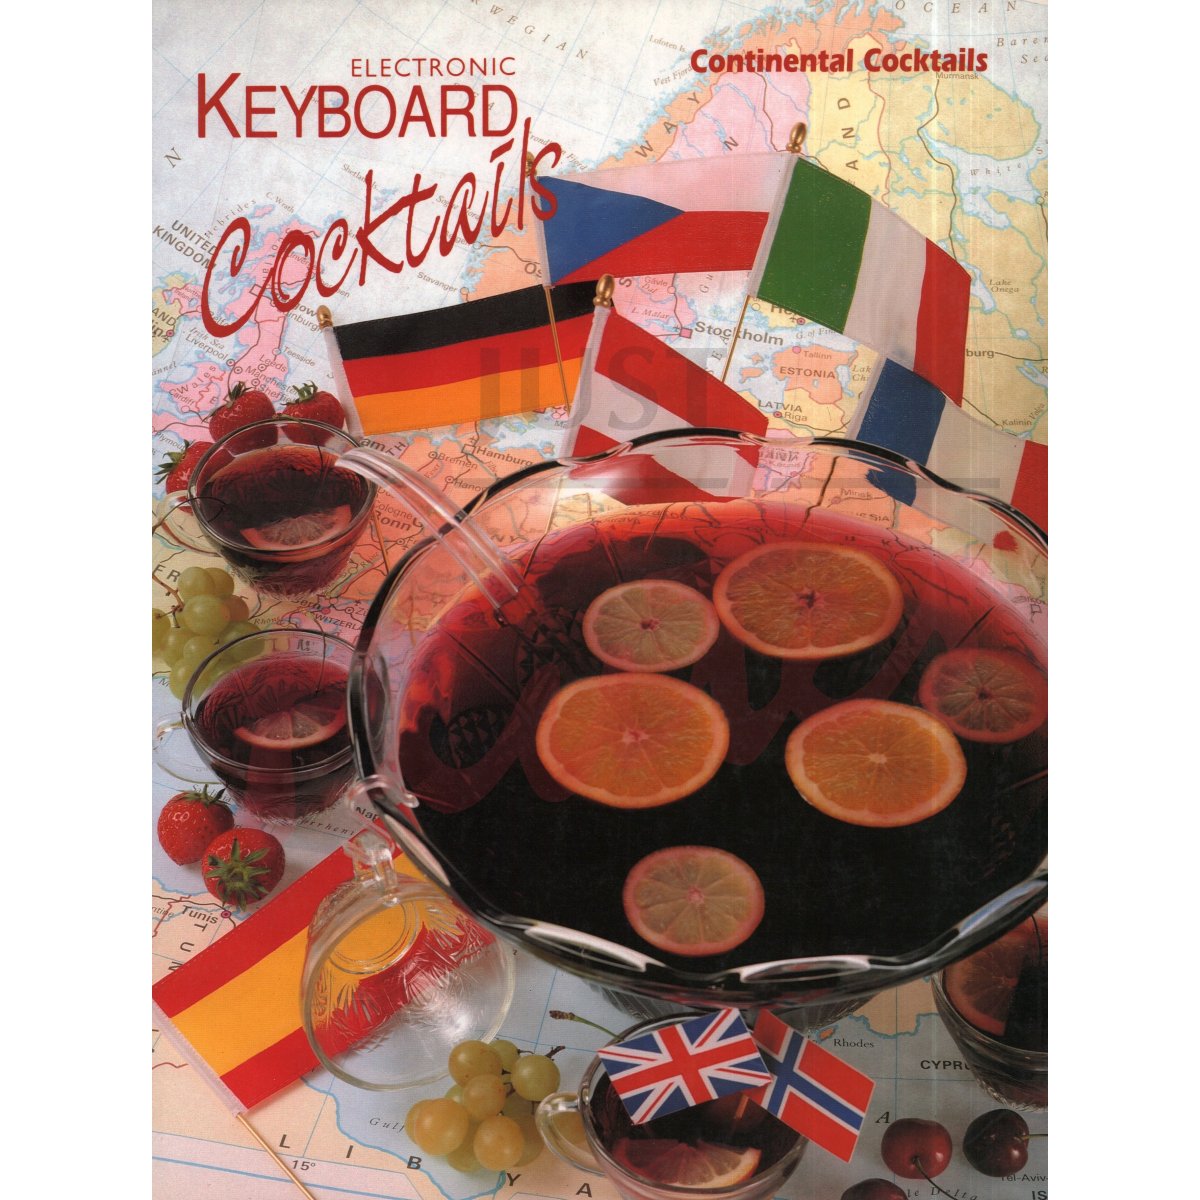 Keyboard Cocktails: Continental Cocktails for Electronic Keyboard